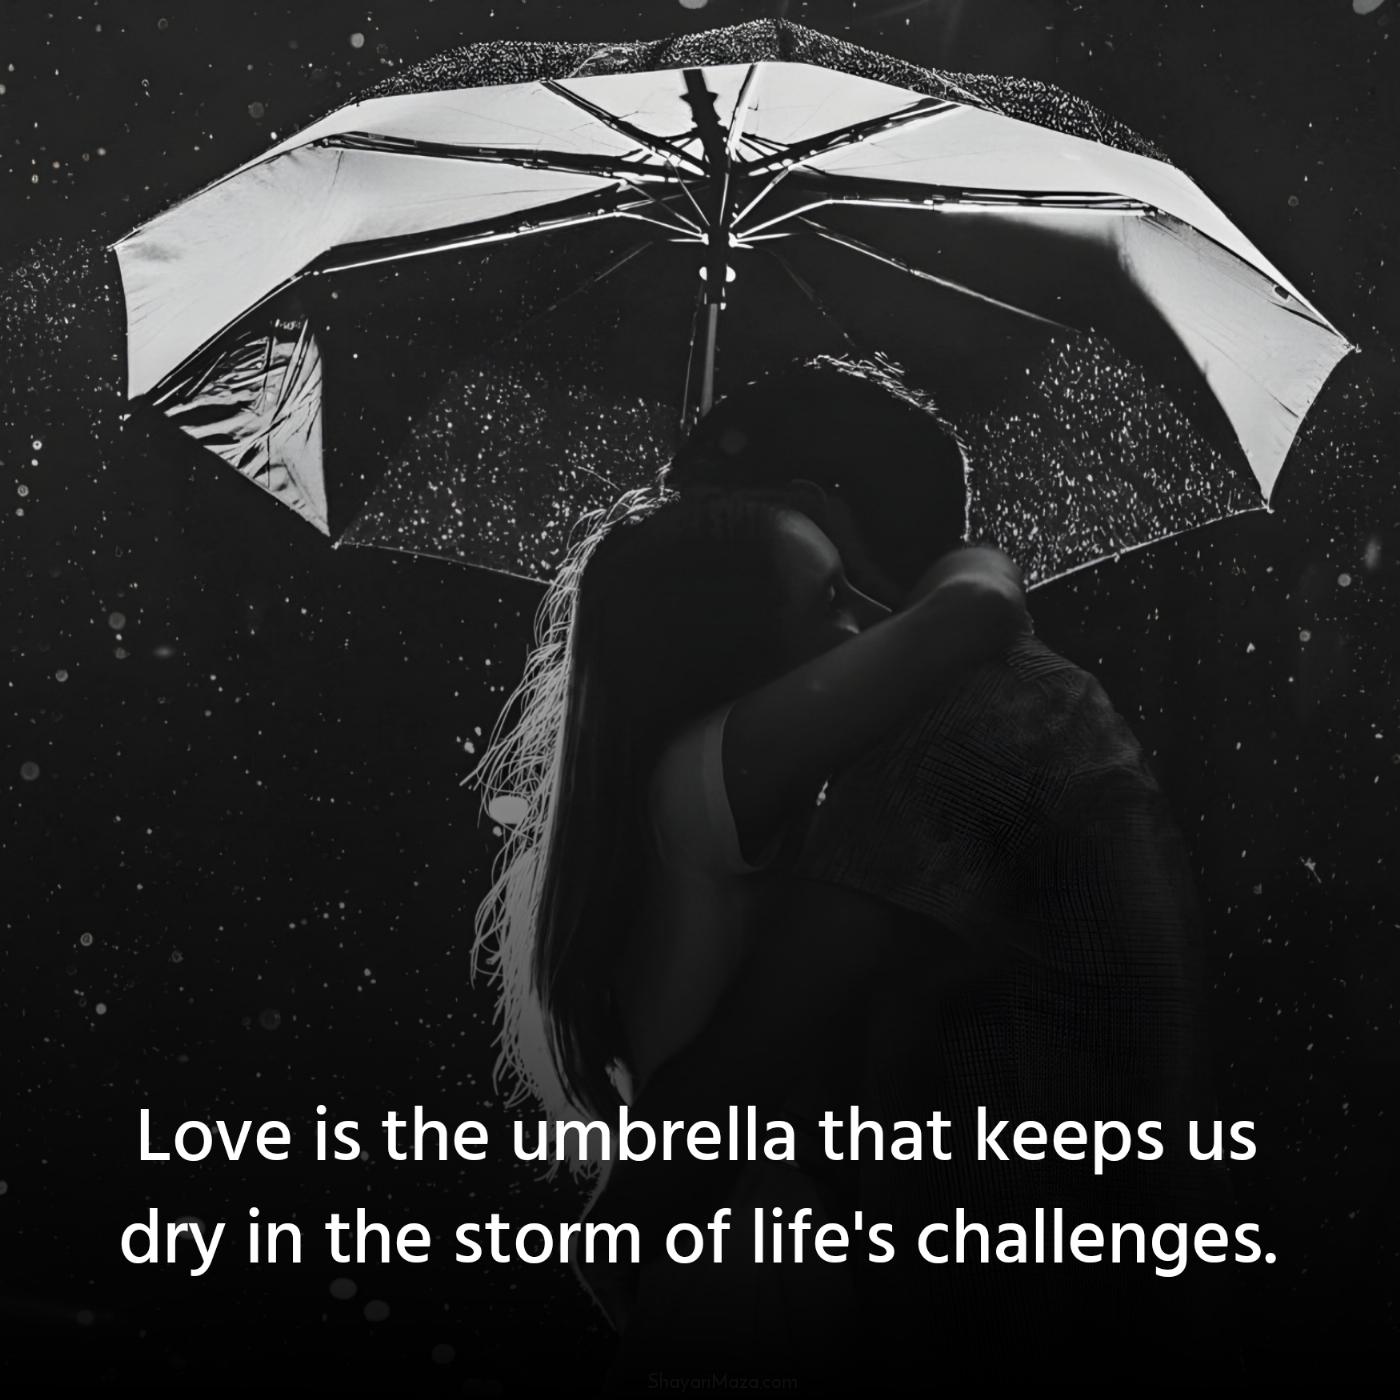 Love is the umbrella that keeps us dry in the storm